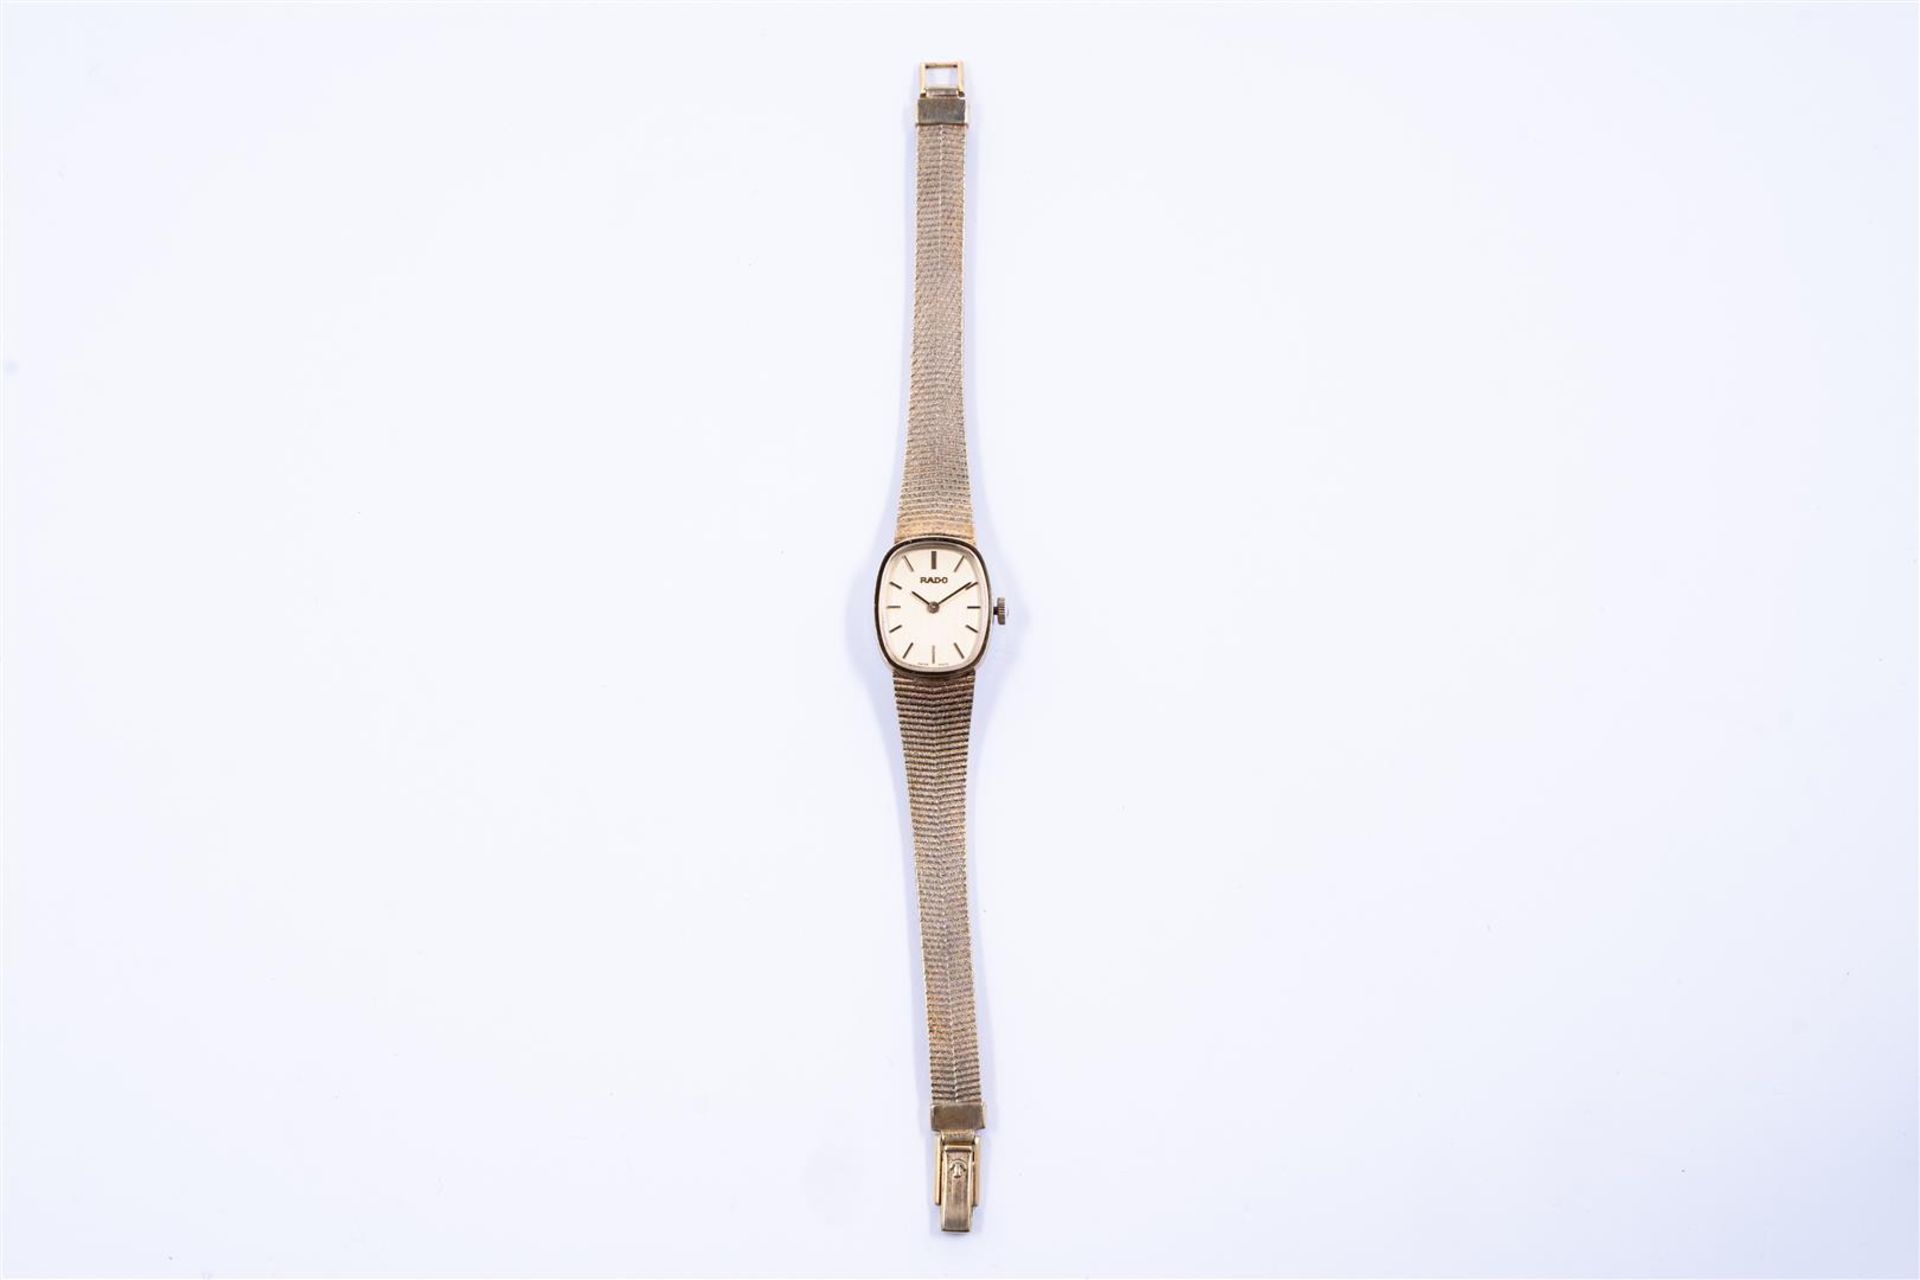 Rado ladies watch and gold-colored dial.
Number designation: Dashes
Water-resistant: Splash-proof
Mo